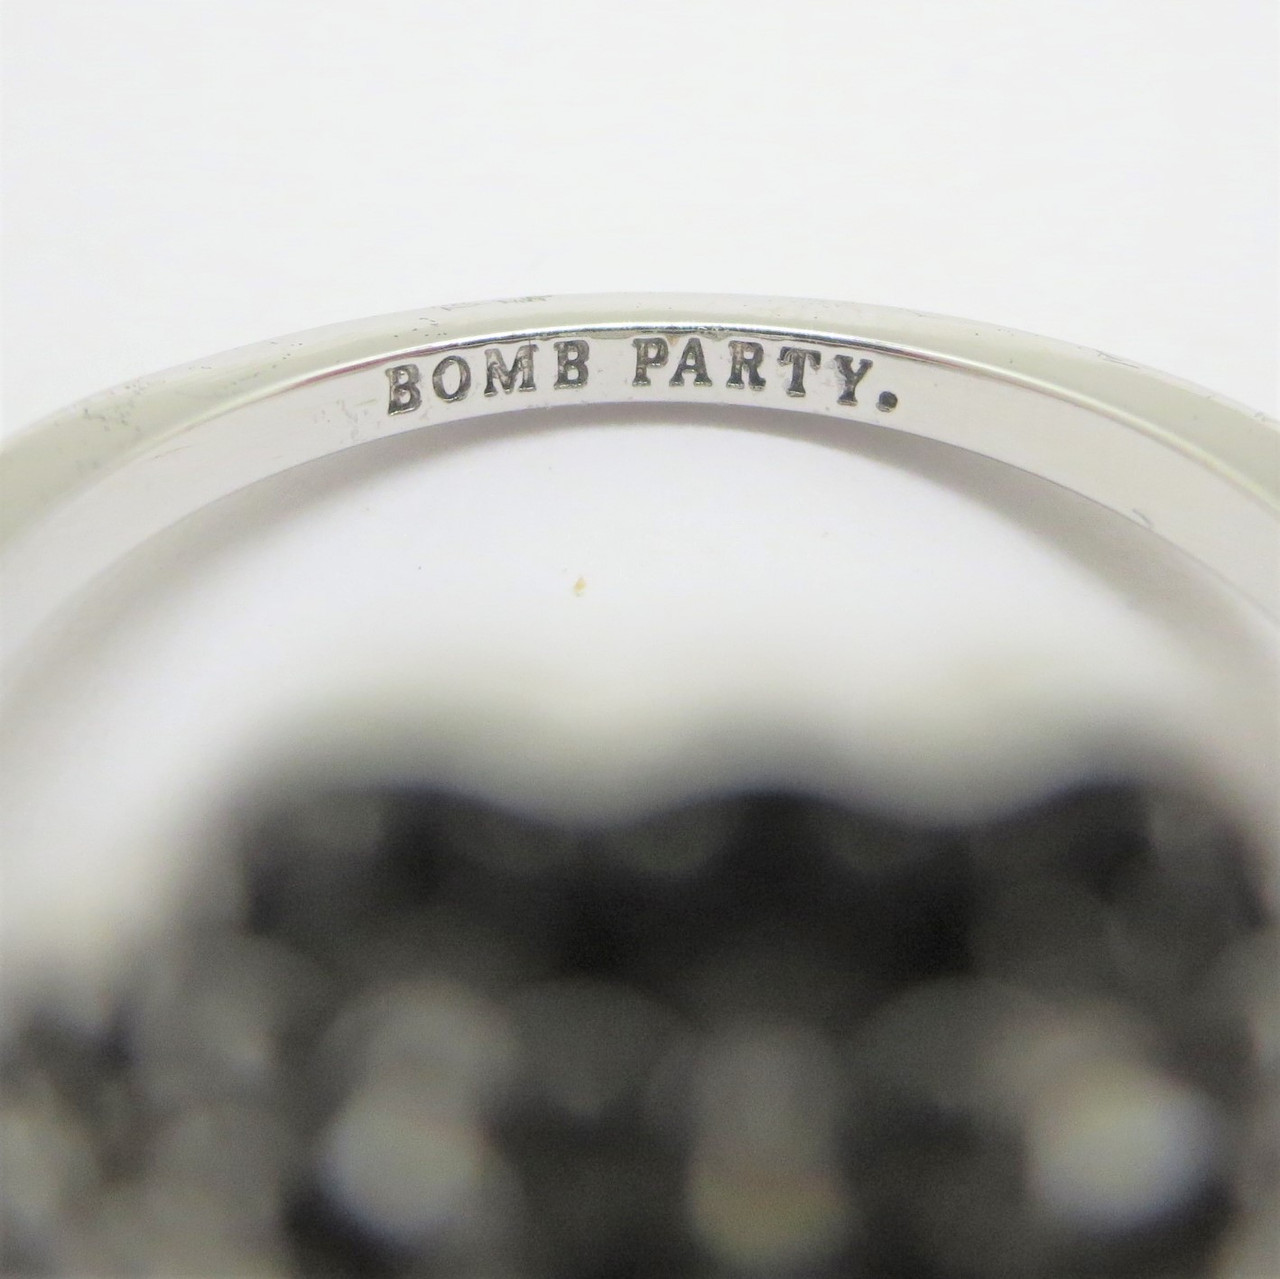 Bomb Party Rhodium Plated Green Ring Size 10 RBP3021